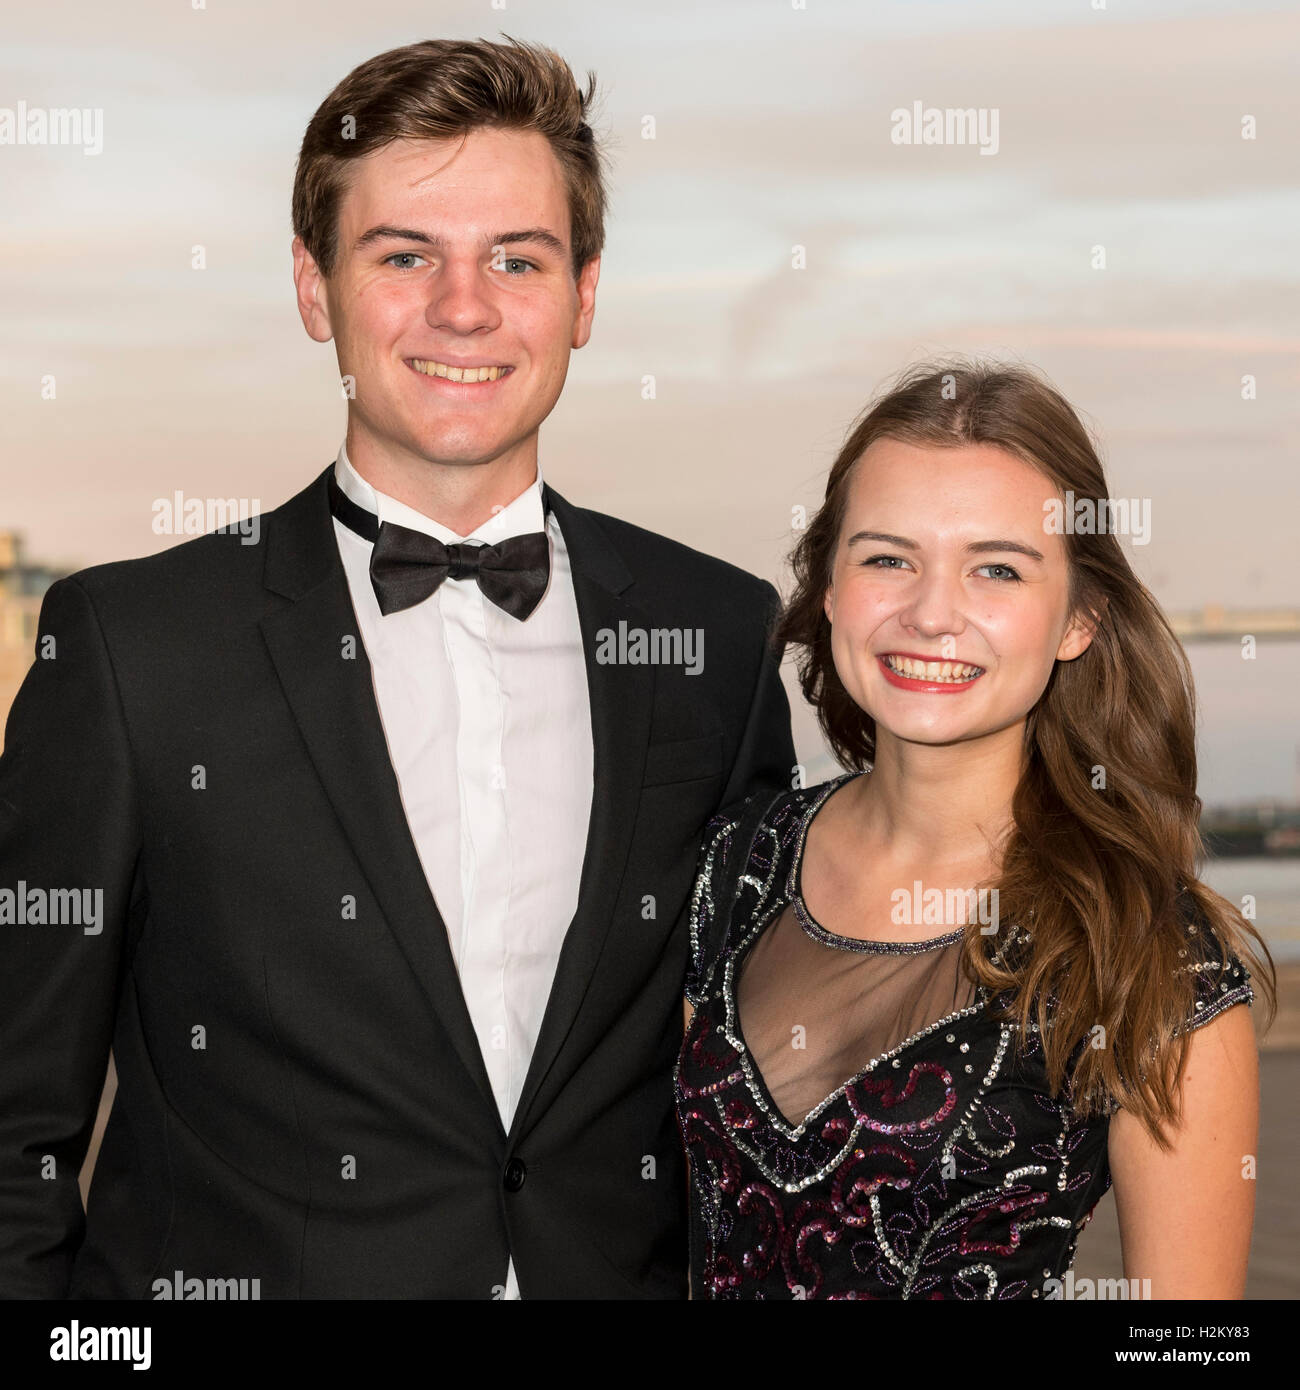 London, UK.  29 September 2016.  Former Great British Bake-Off contestant, Martha Collison and partner attend the Childline Ball at Old Billingsgate Market to help celebrate 30 years of Childline.  This year's theme is The Great British Bake-Off. Credit:  Stephen Chung / Alamy Live News Stock Photo